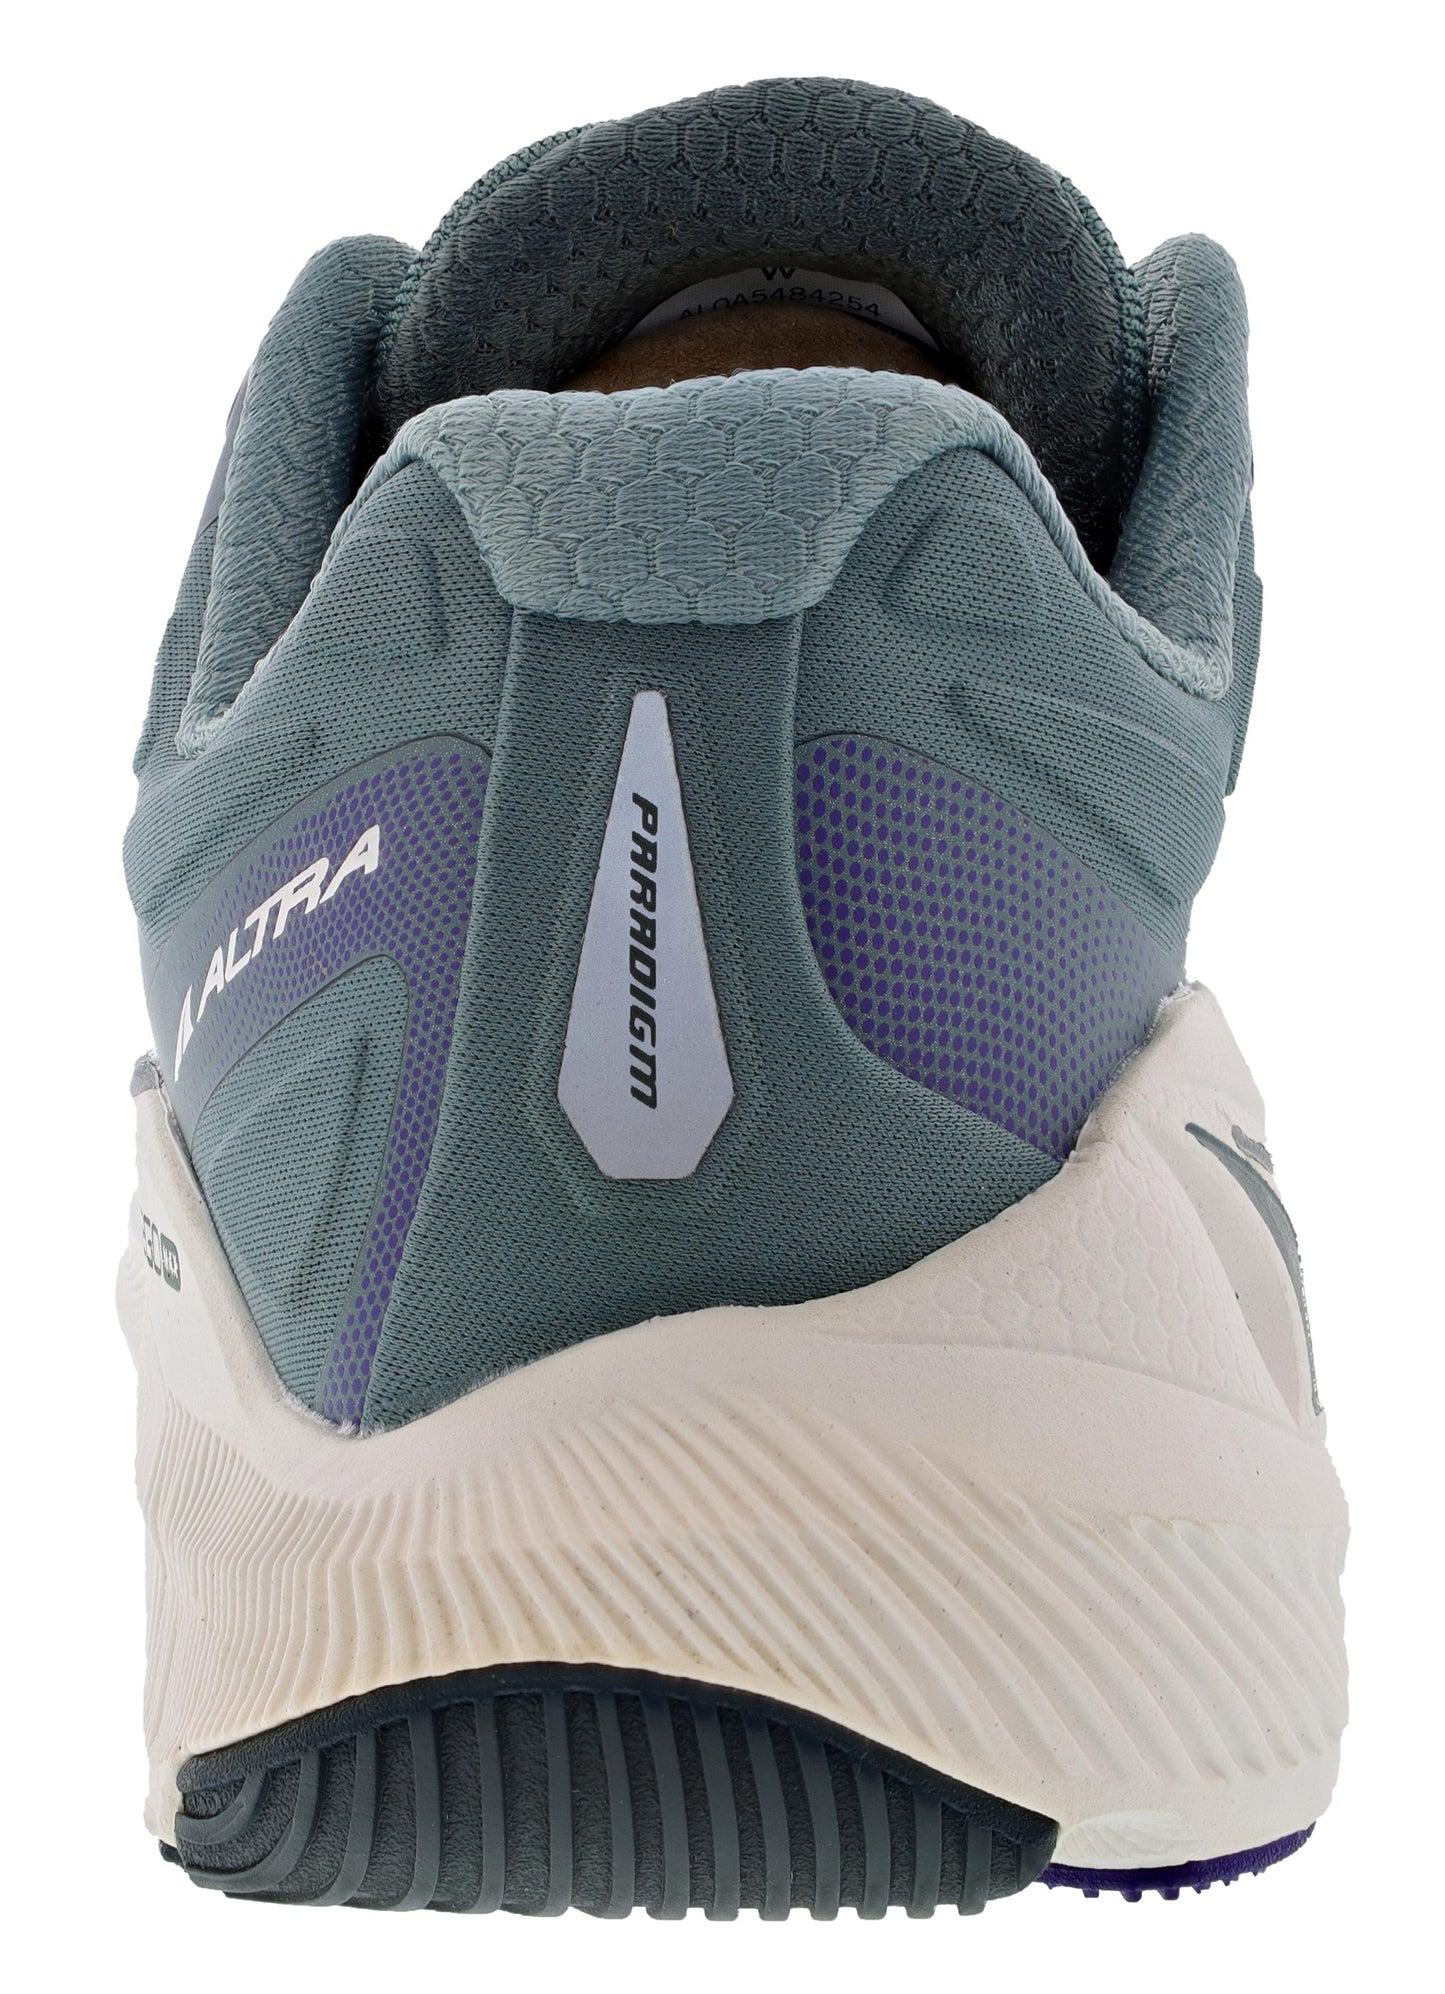 
                  
                    Back of Gray/Purple Altra Women's Paradigm 6 Trainer Running Shoes
                  
                